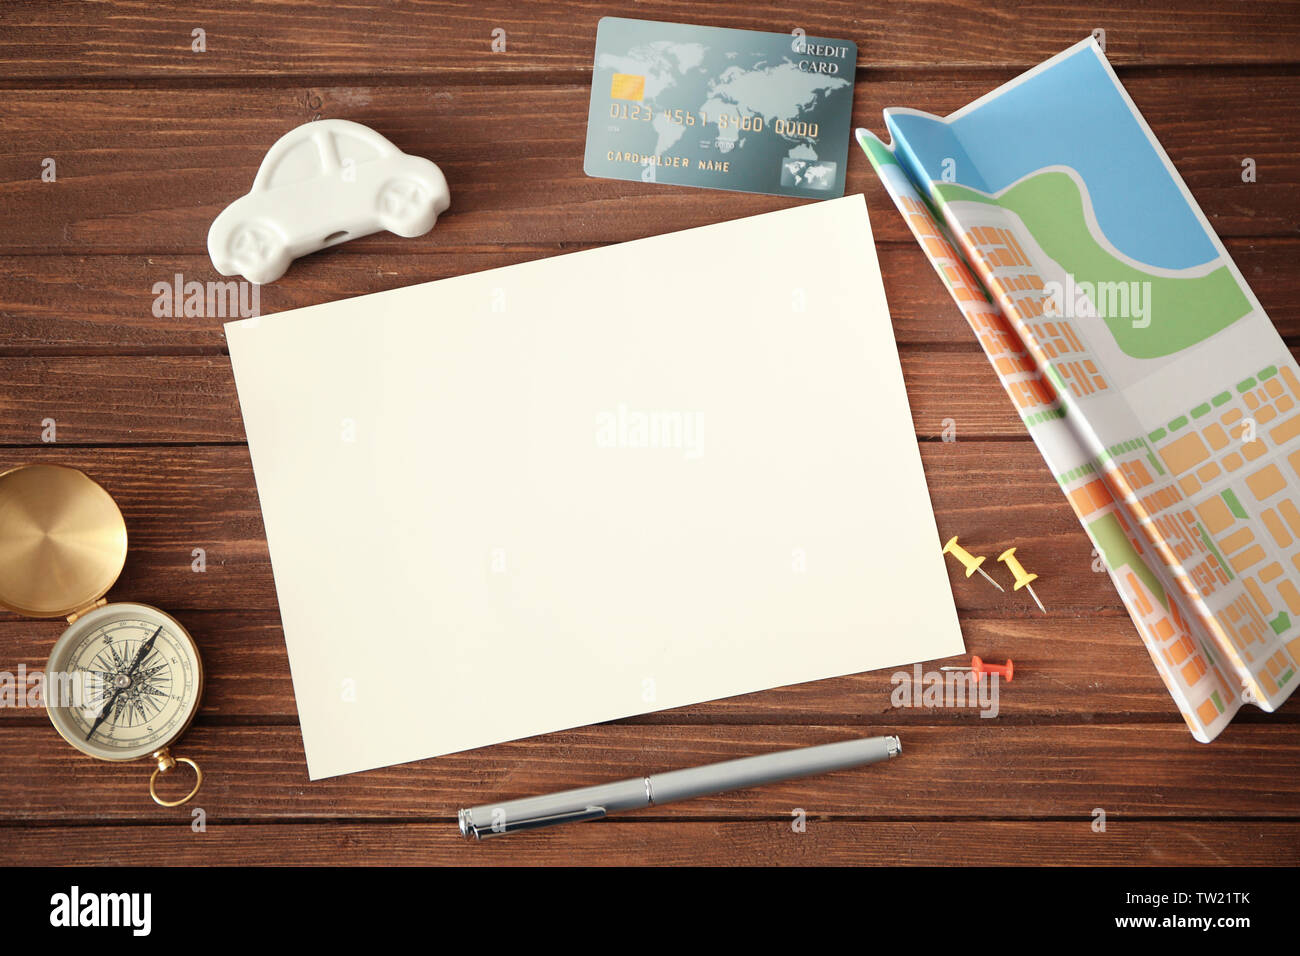 Blank notepad page, credit card and travel accessories on wooden background Stock Photo